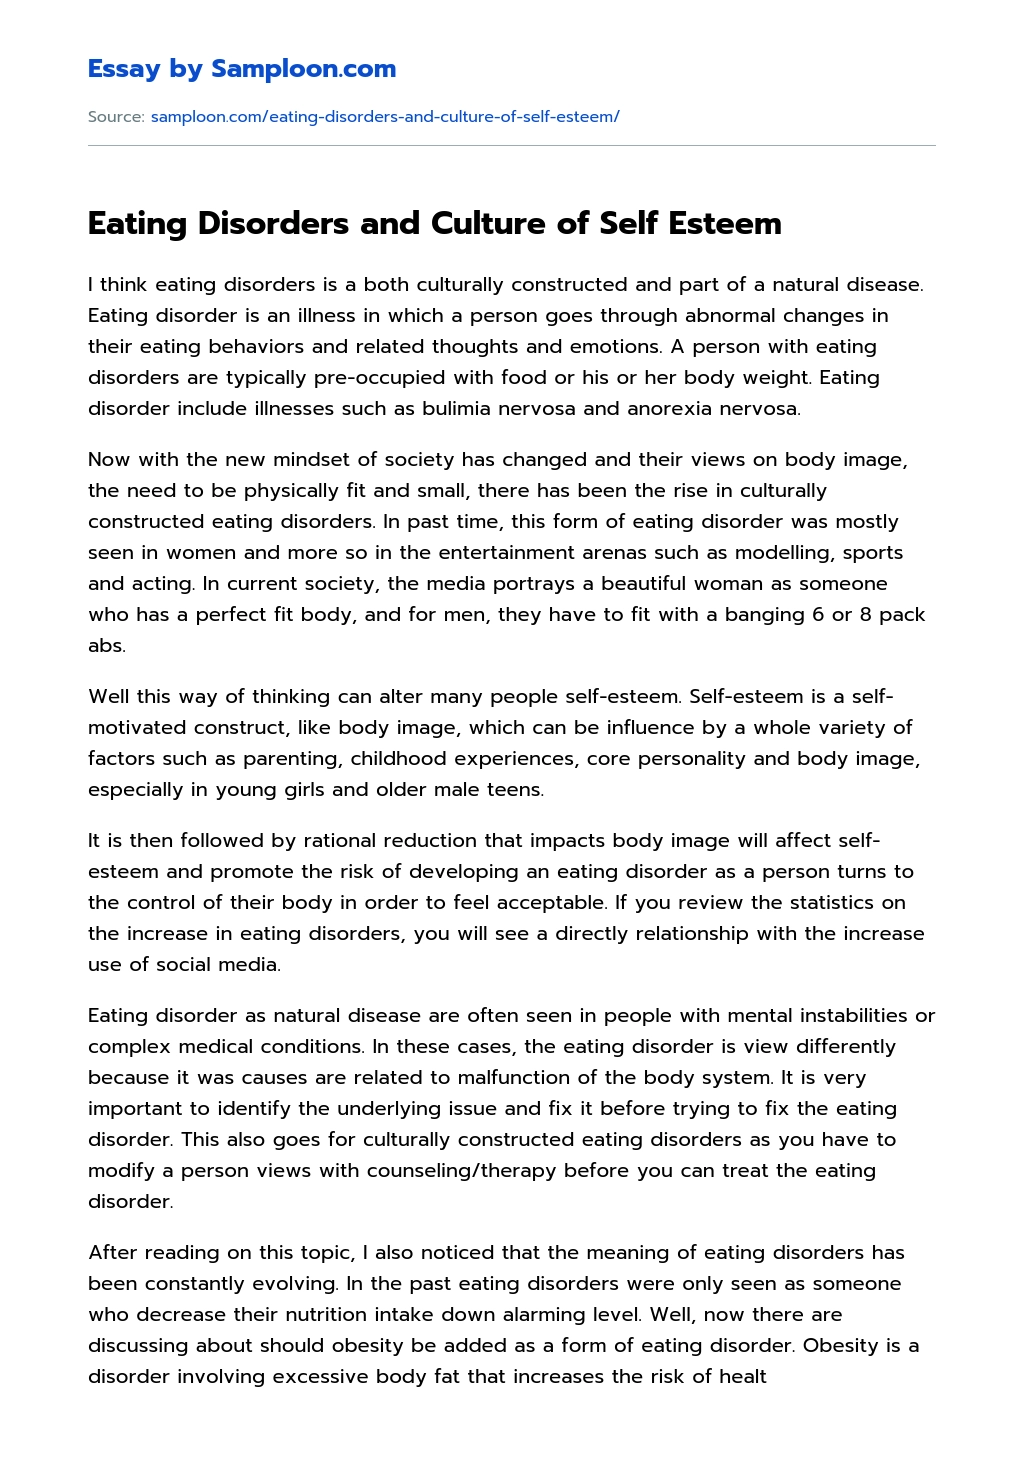 Eating Disorders and Culture of Self Esteem essay